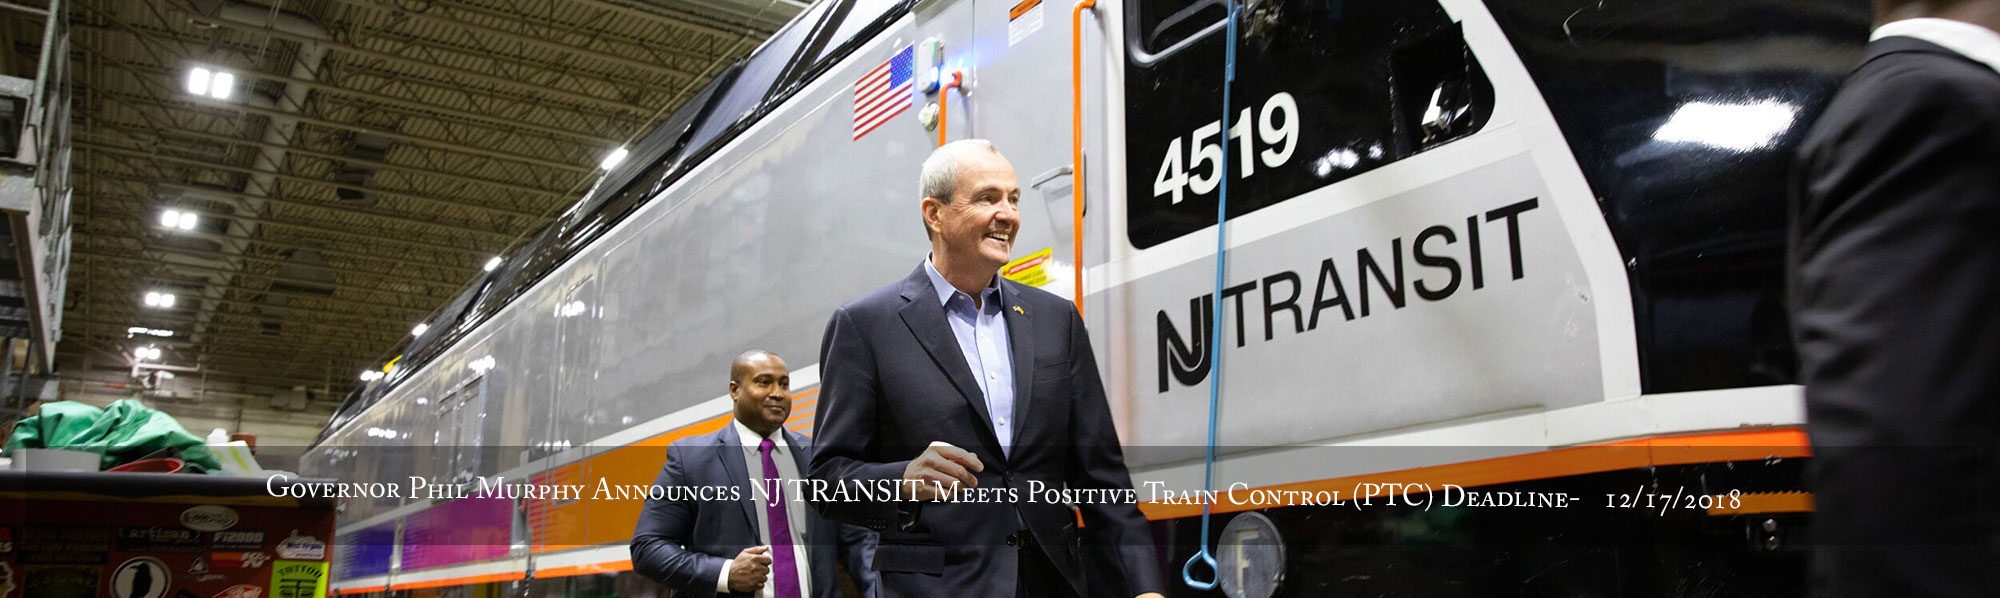 Governor Phil Murphy announces NJ TRANSIT will meet the federally-mandated Positive Train Control (PTC) deadline on December 17, 2018,